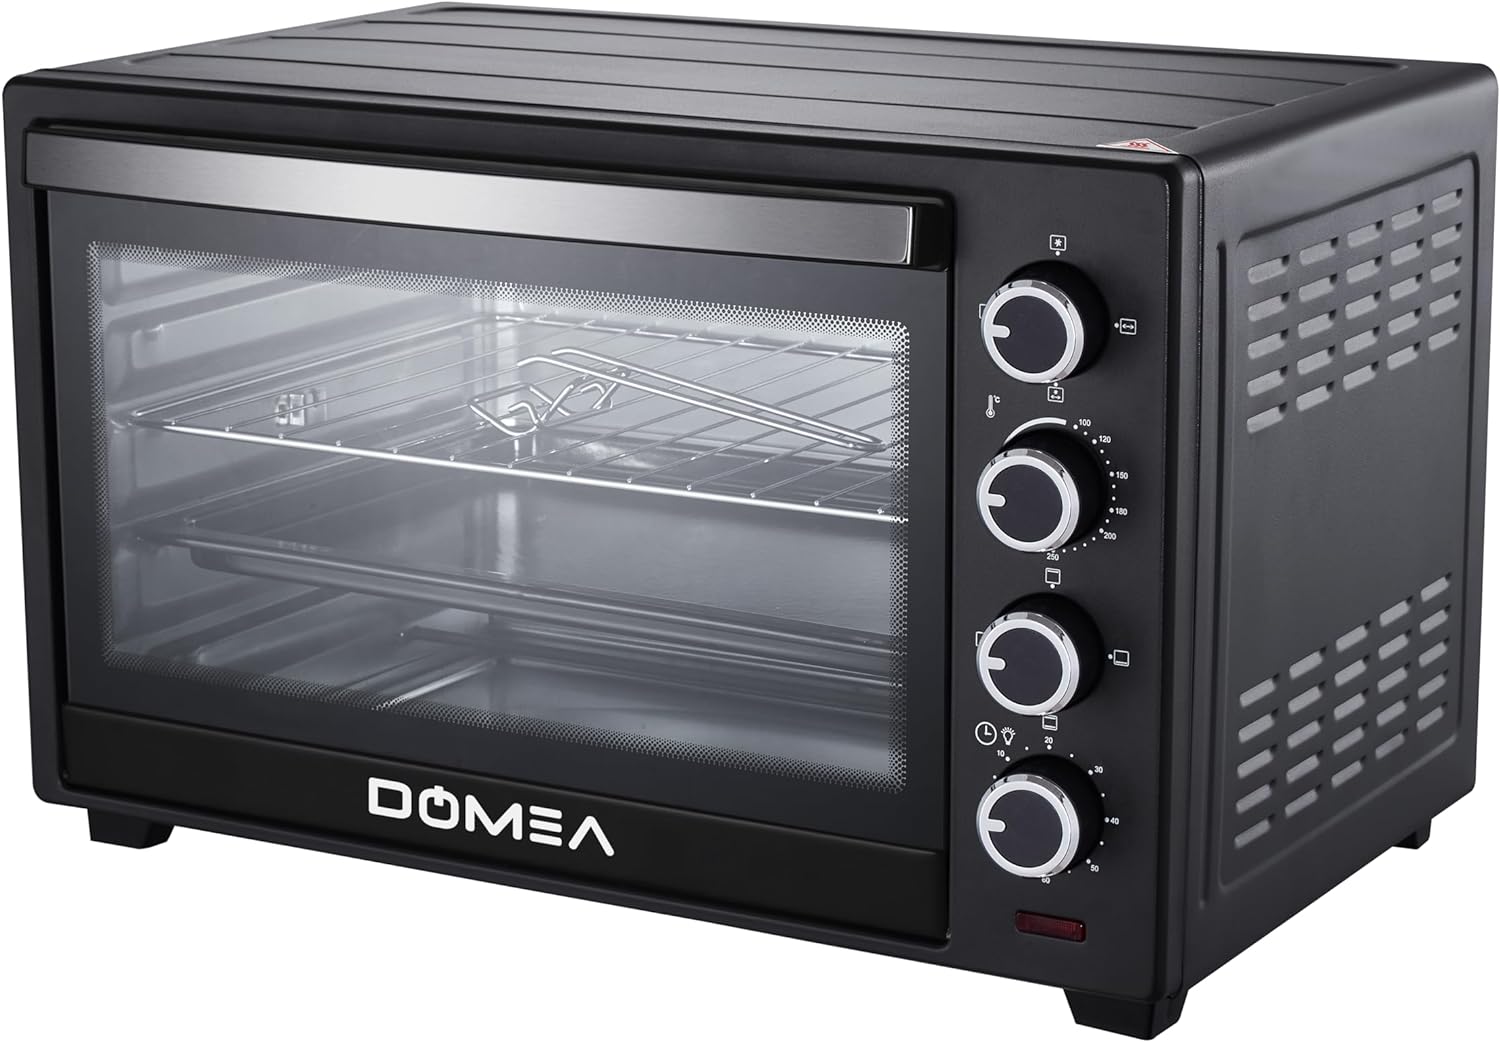 Domea electric toaster oven | counter top oven with rotisserie function| convection function | grill and cooking tray | adjustable heat settings | 60 minutes timer, 40 litre, 1600w